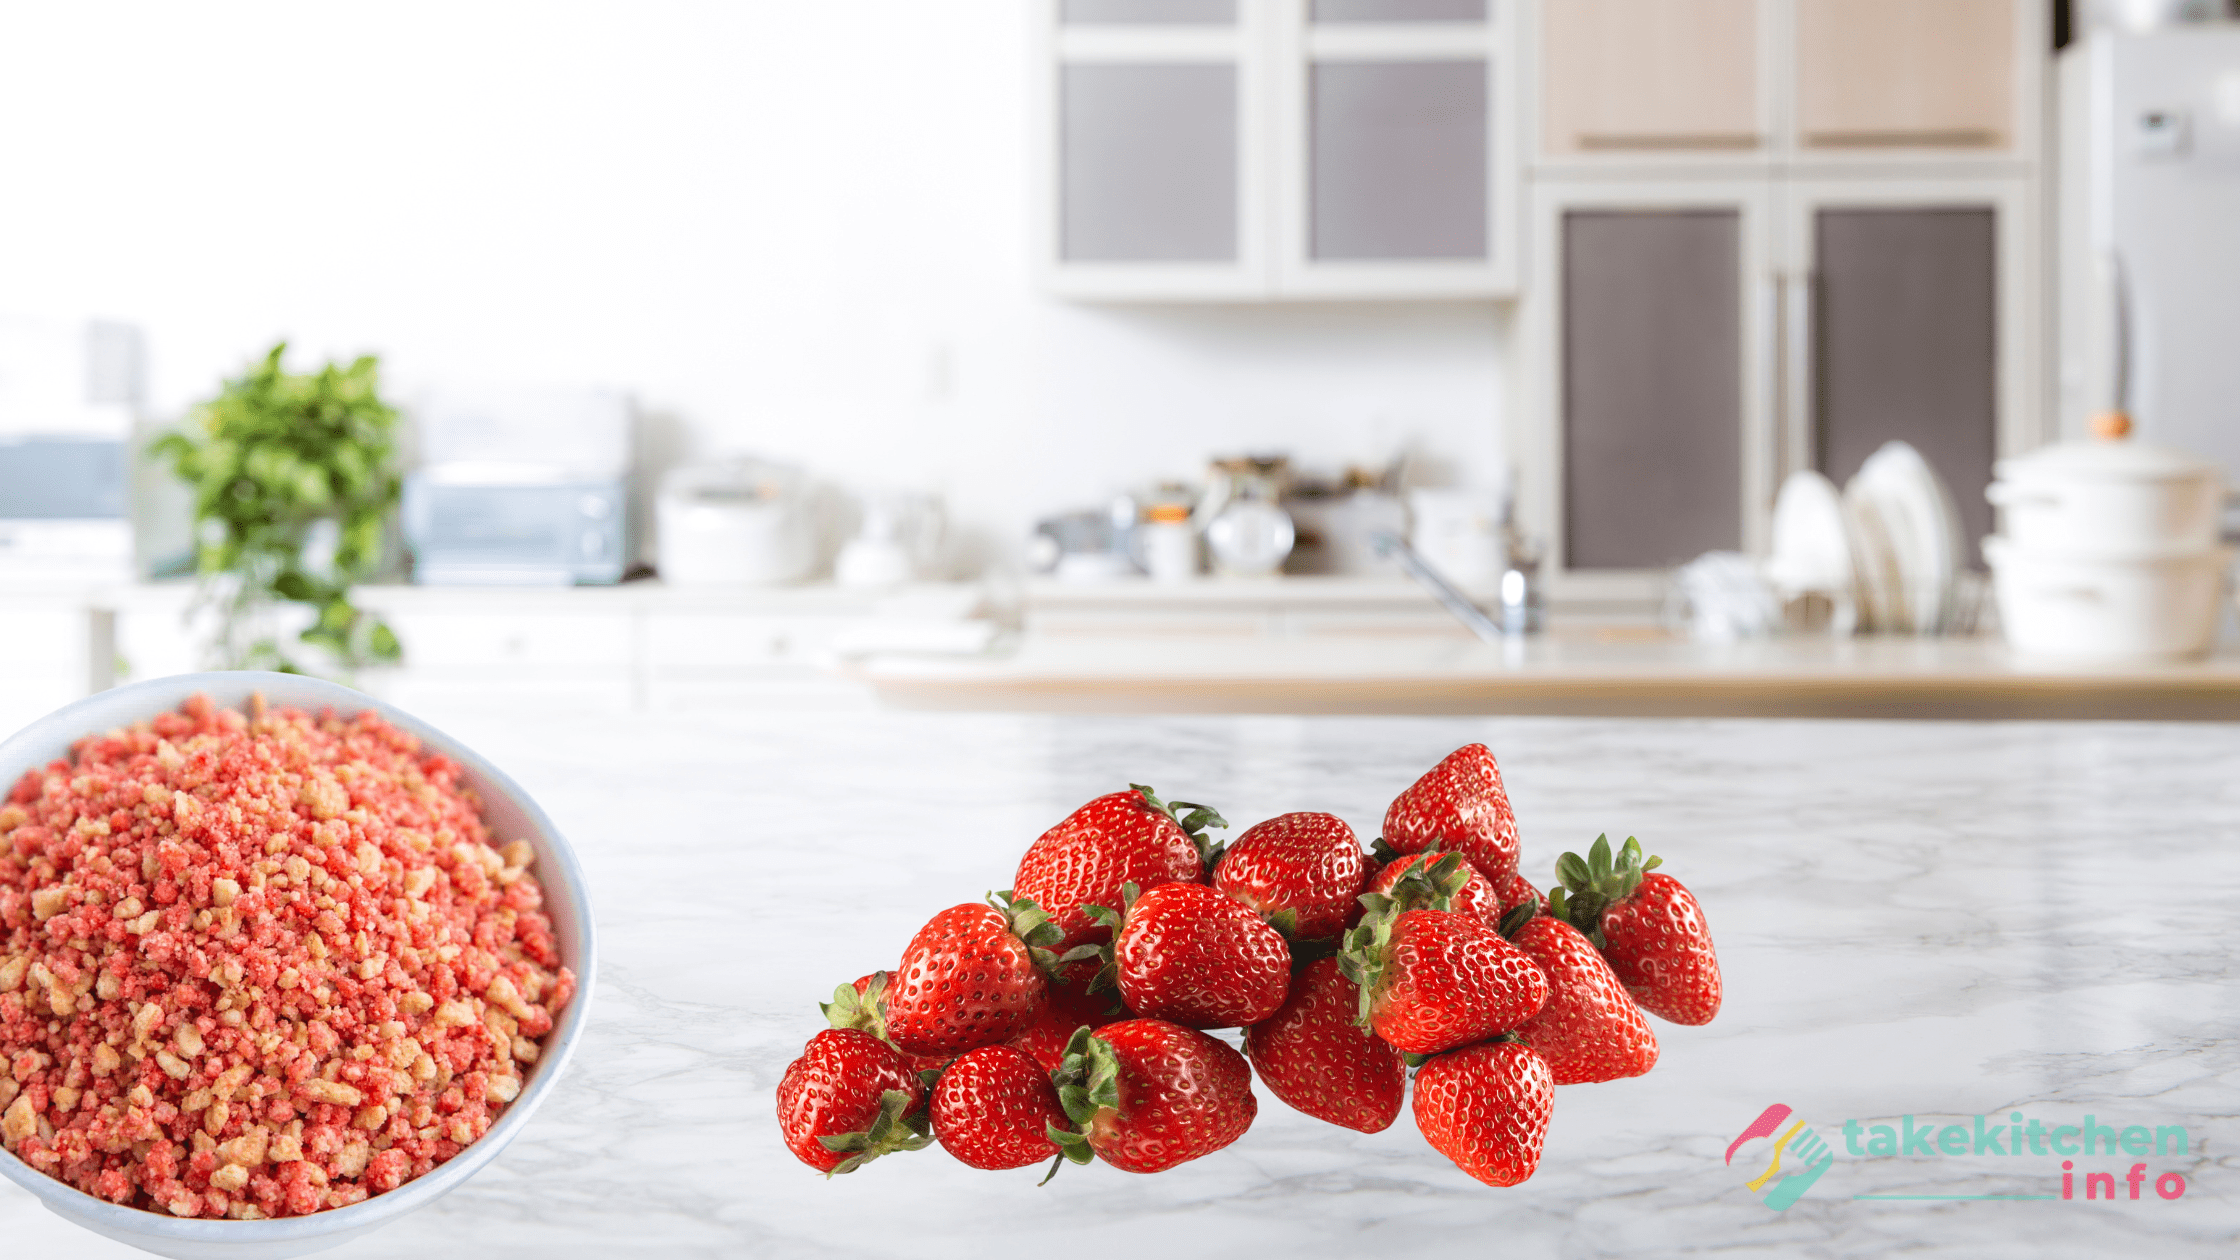 How To Make Strawberry Crunch